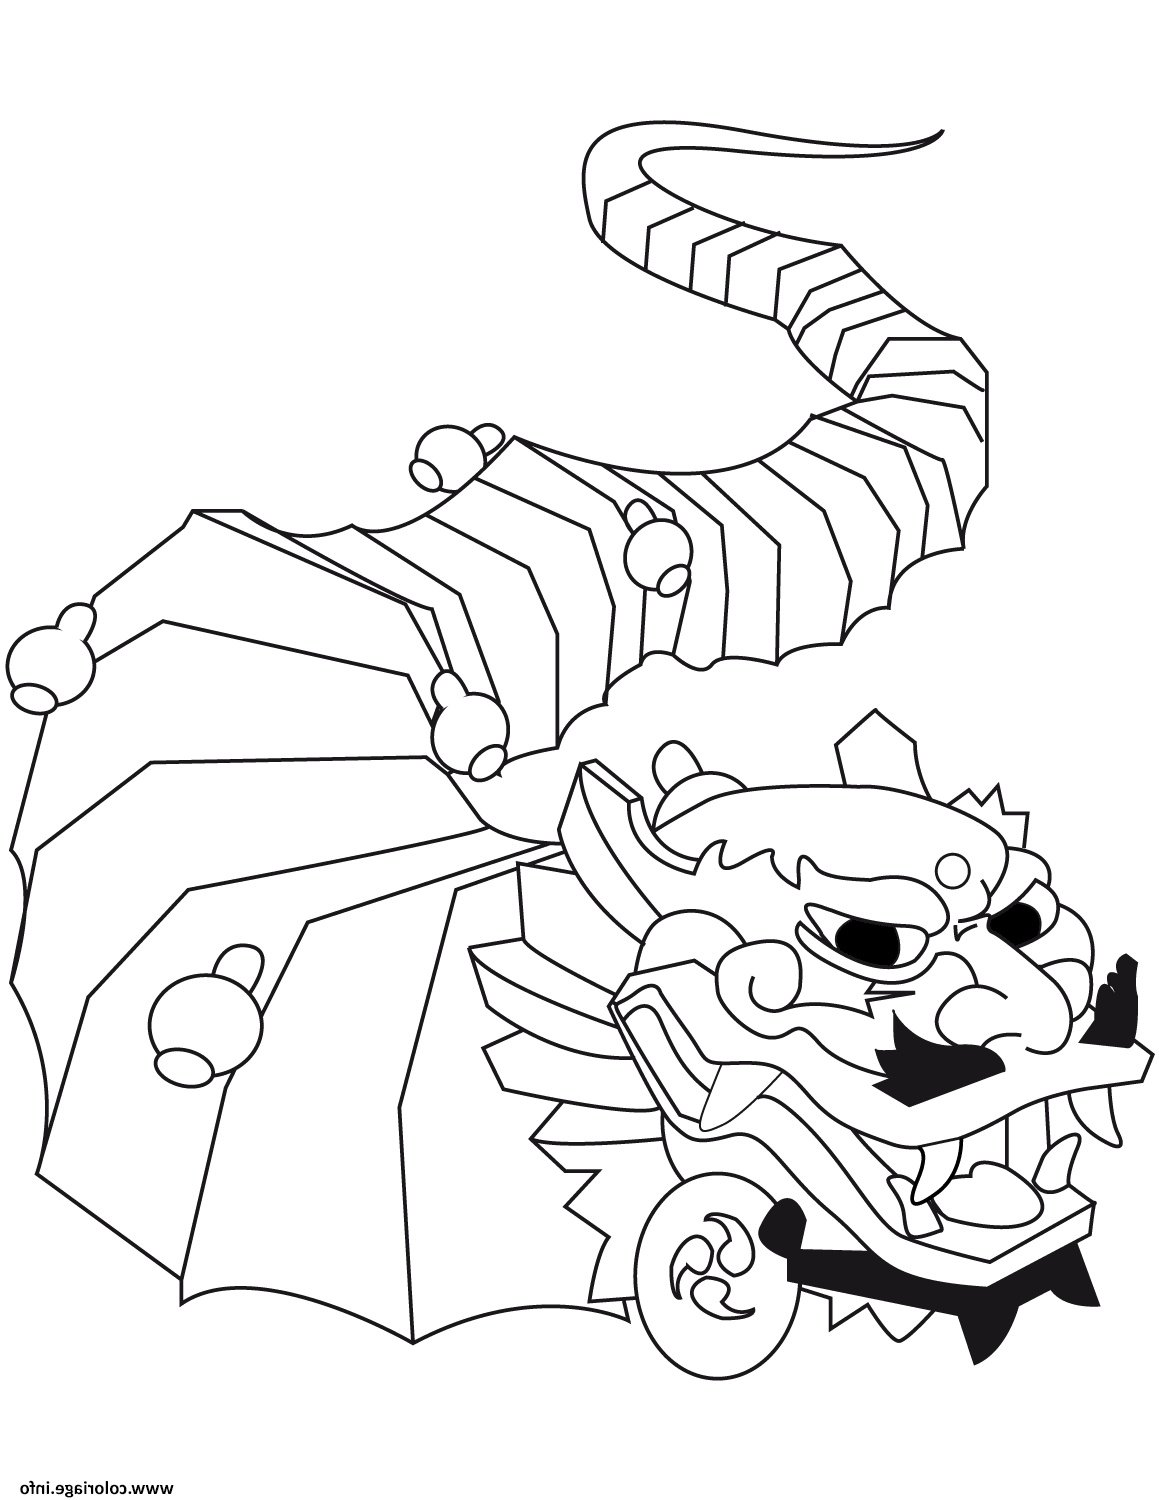 Coloriage Nouvel An Chinois Beau Collection Coloriage Cool Nouvel An Chinois Dragon Jecolorie